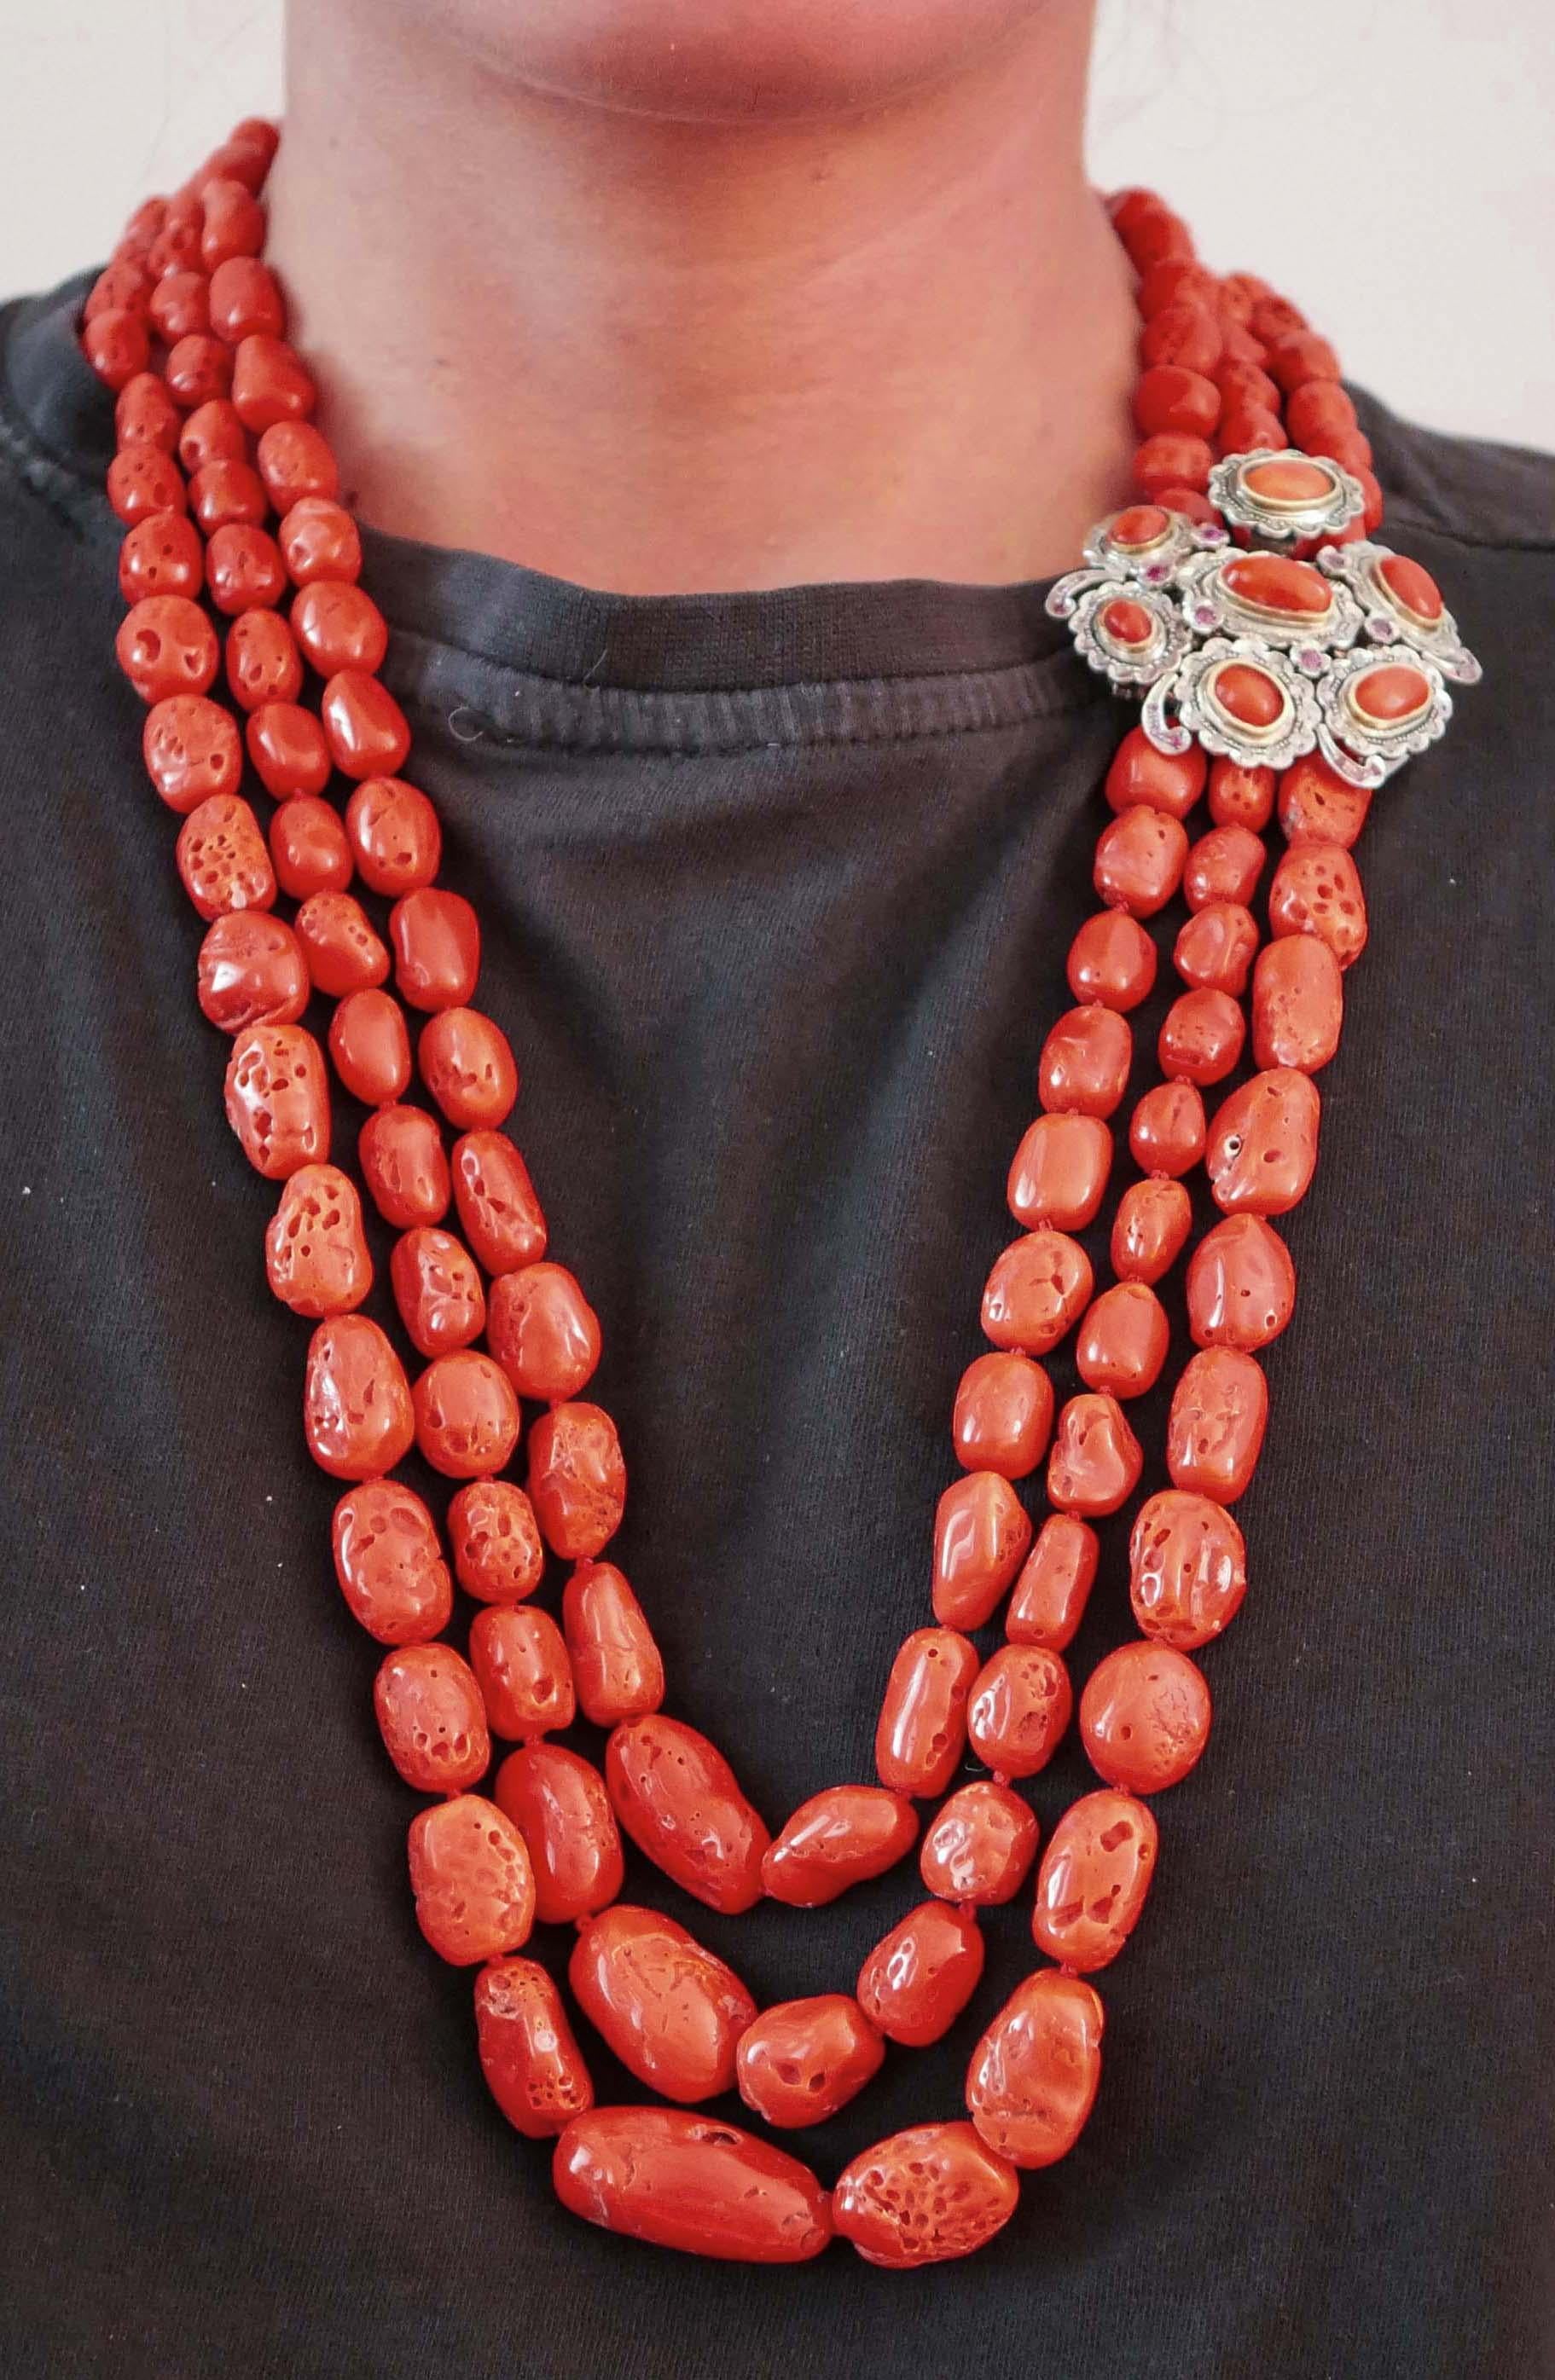 Women's Coral, Rubies, Diamonds, Rose Gold and Silver Retrò Necklace. For Sale